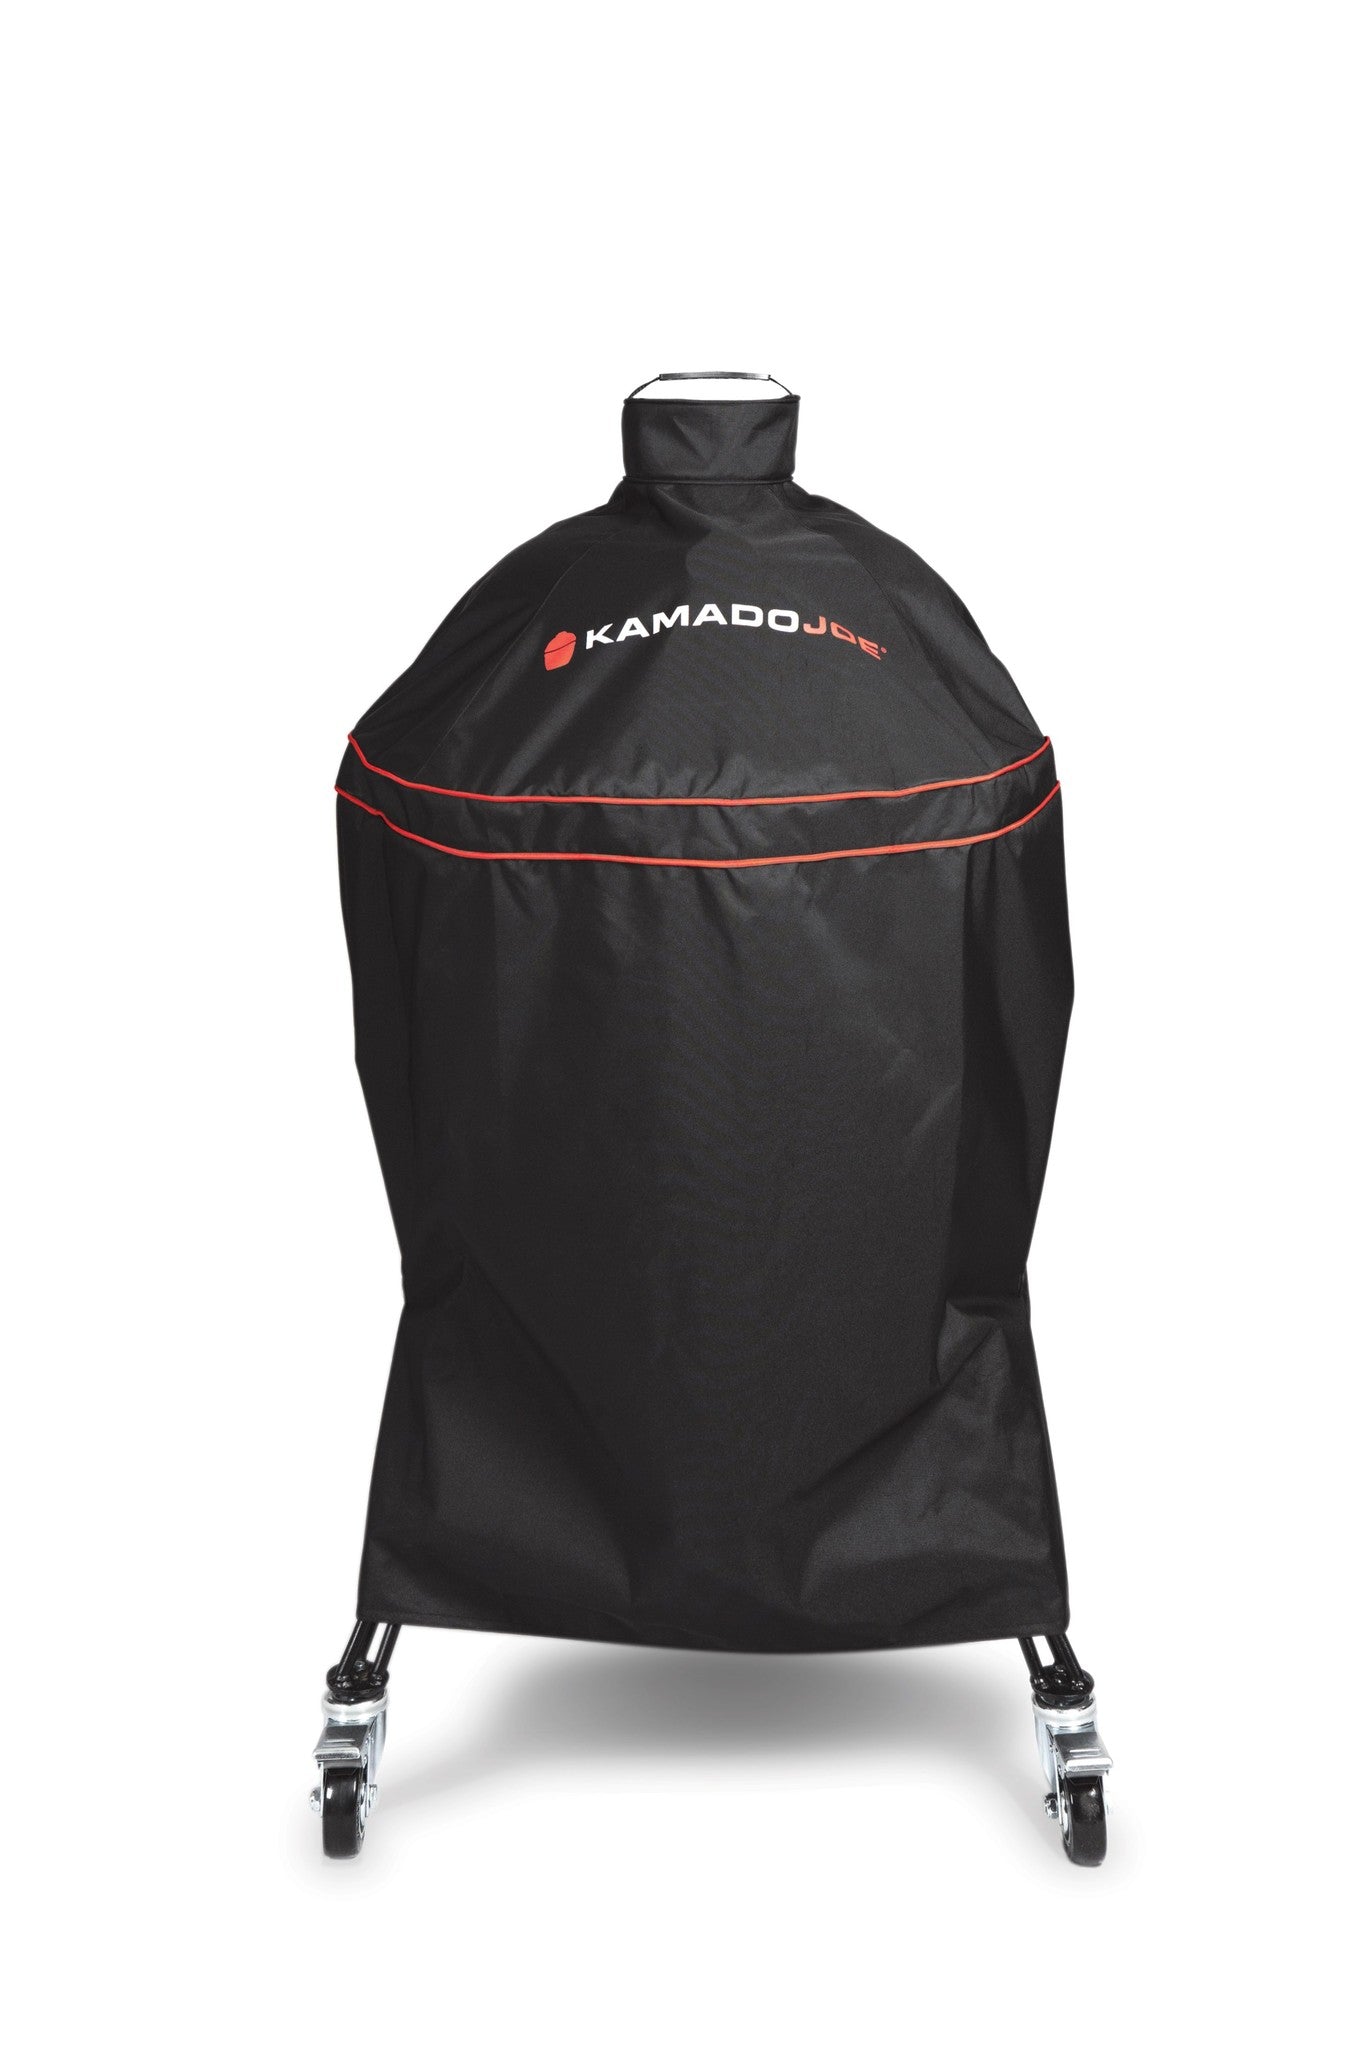 Grill Cover for Classic Kamado Joe Grill